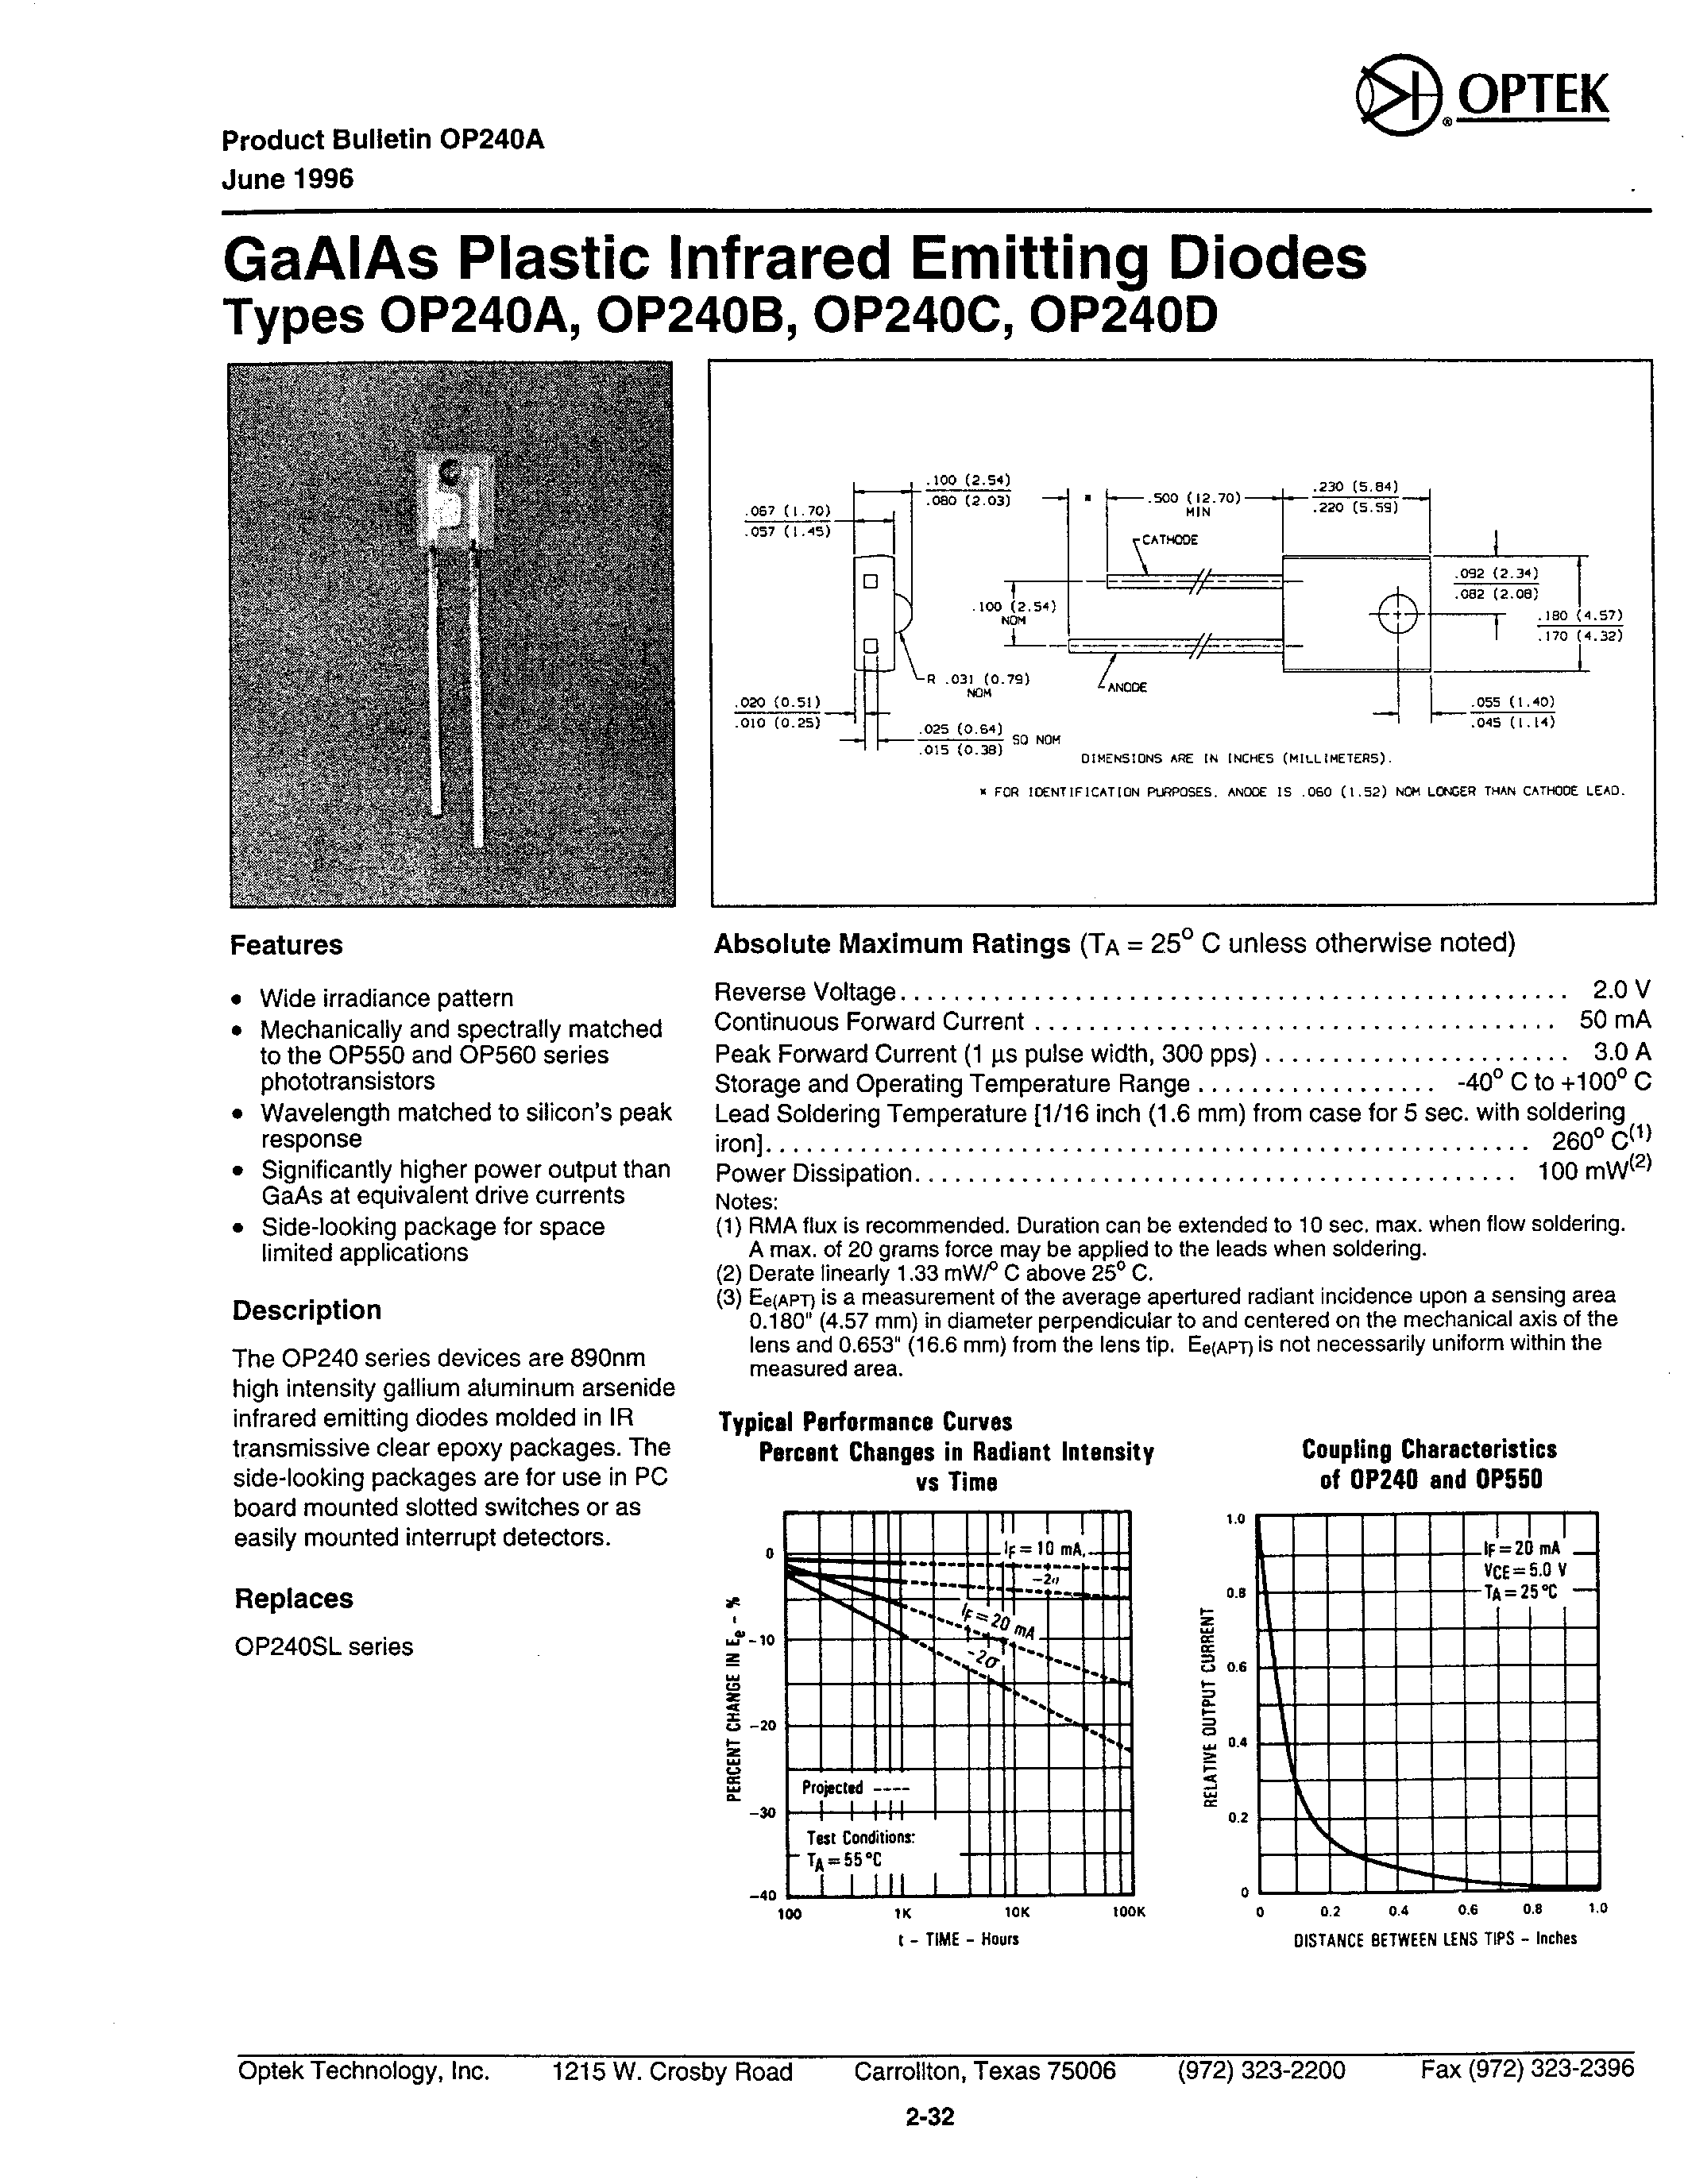 Datasheet OP240A - GAAIAS PLASTIC INFRARED EMITTING DIODES page 1